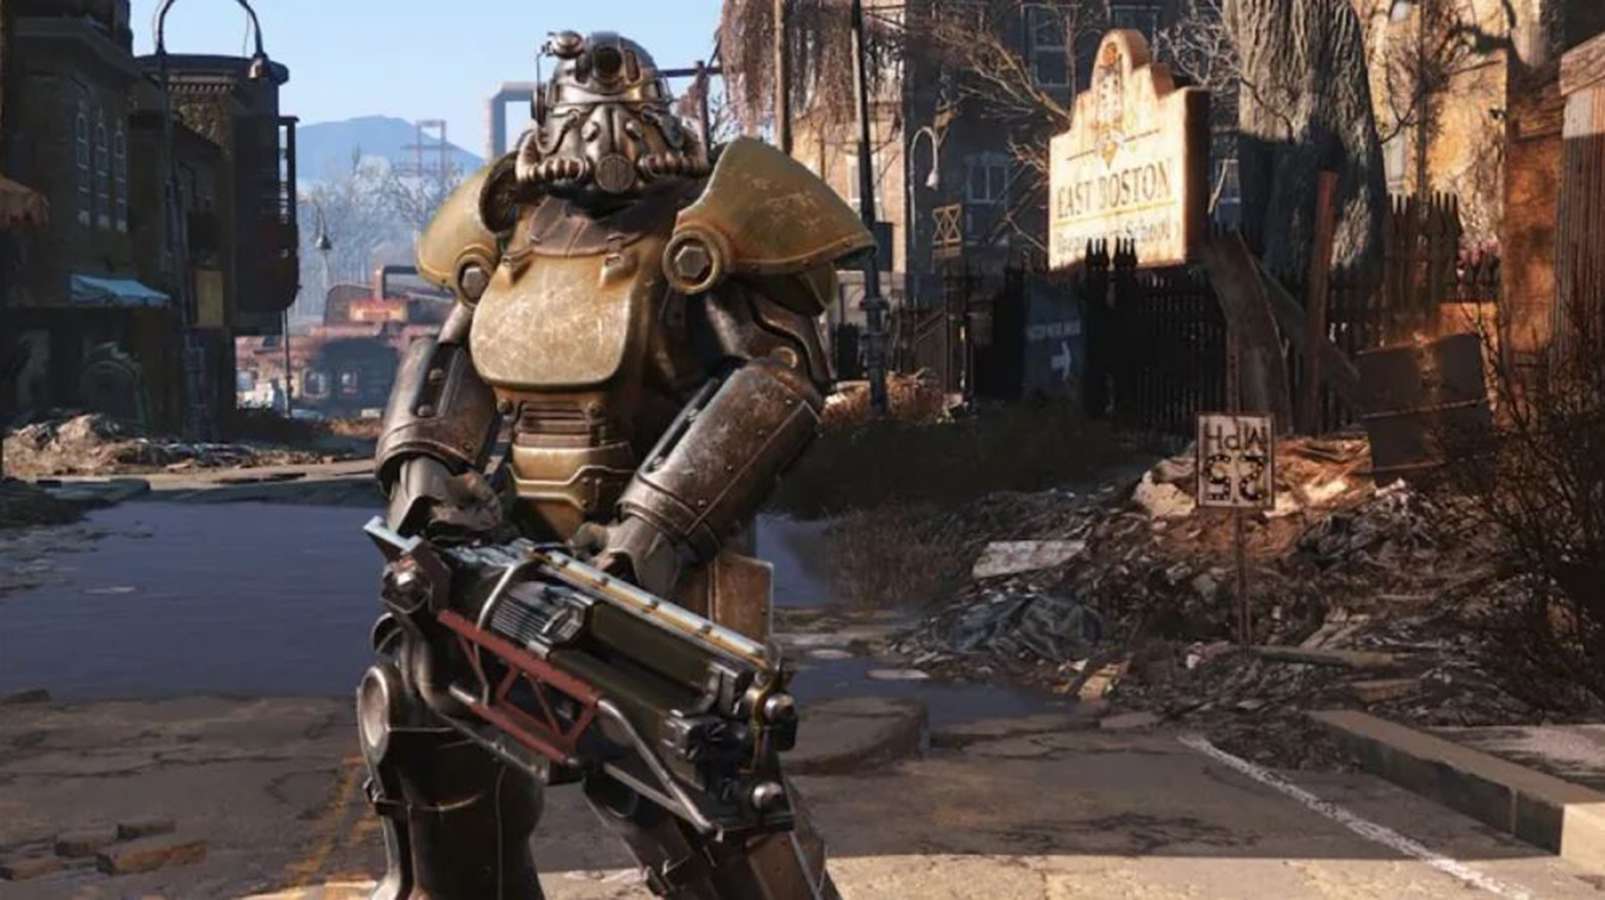 Fallout 4 Next-Gen Update Has A Bugged Out Quality Mode On Xbox Series X|S